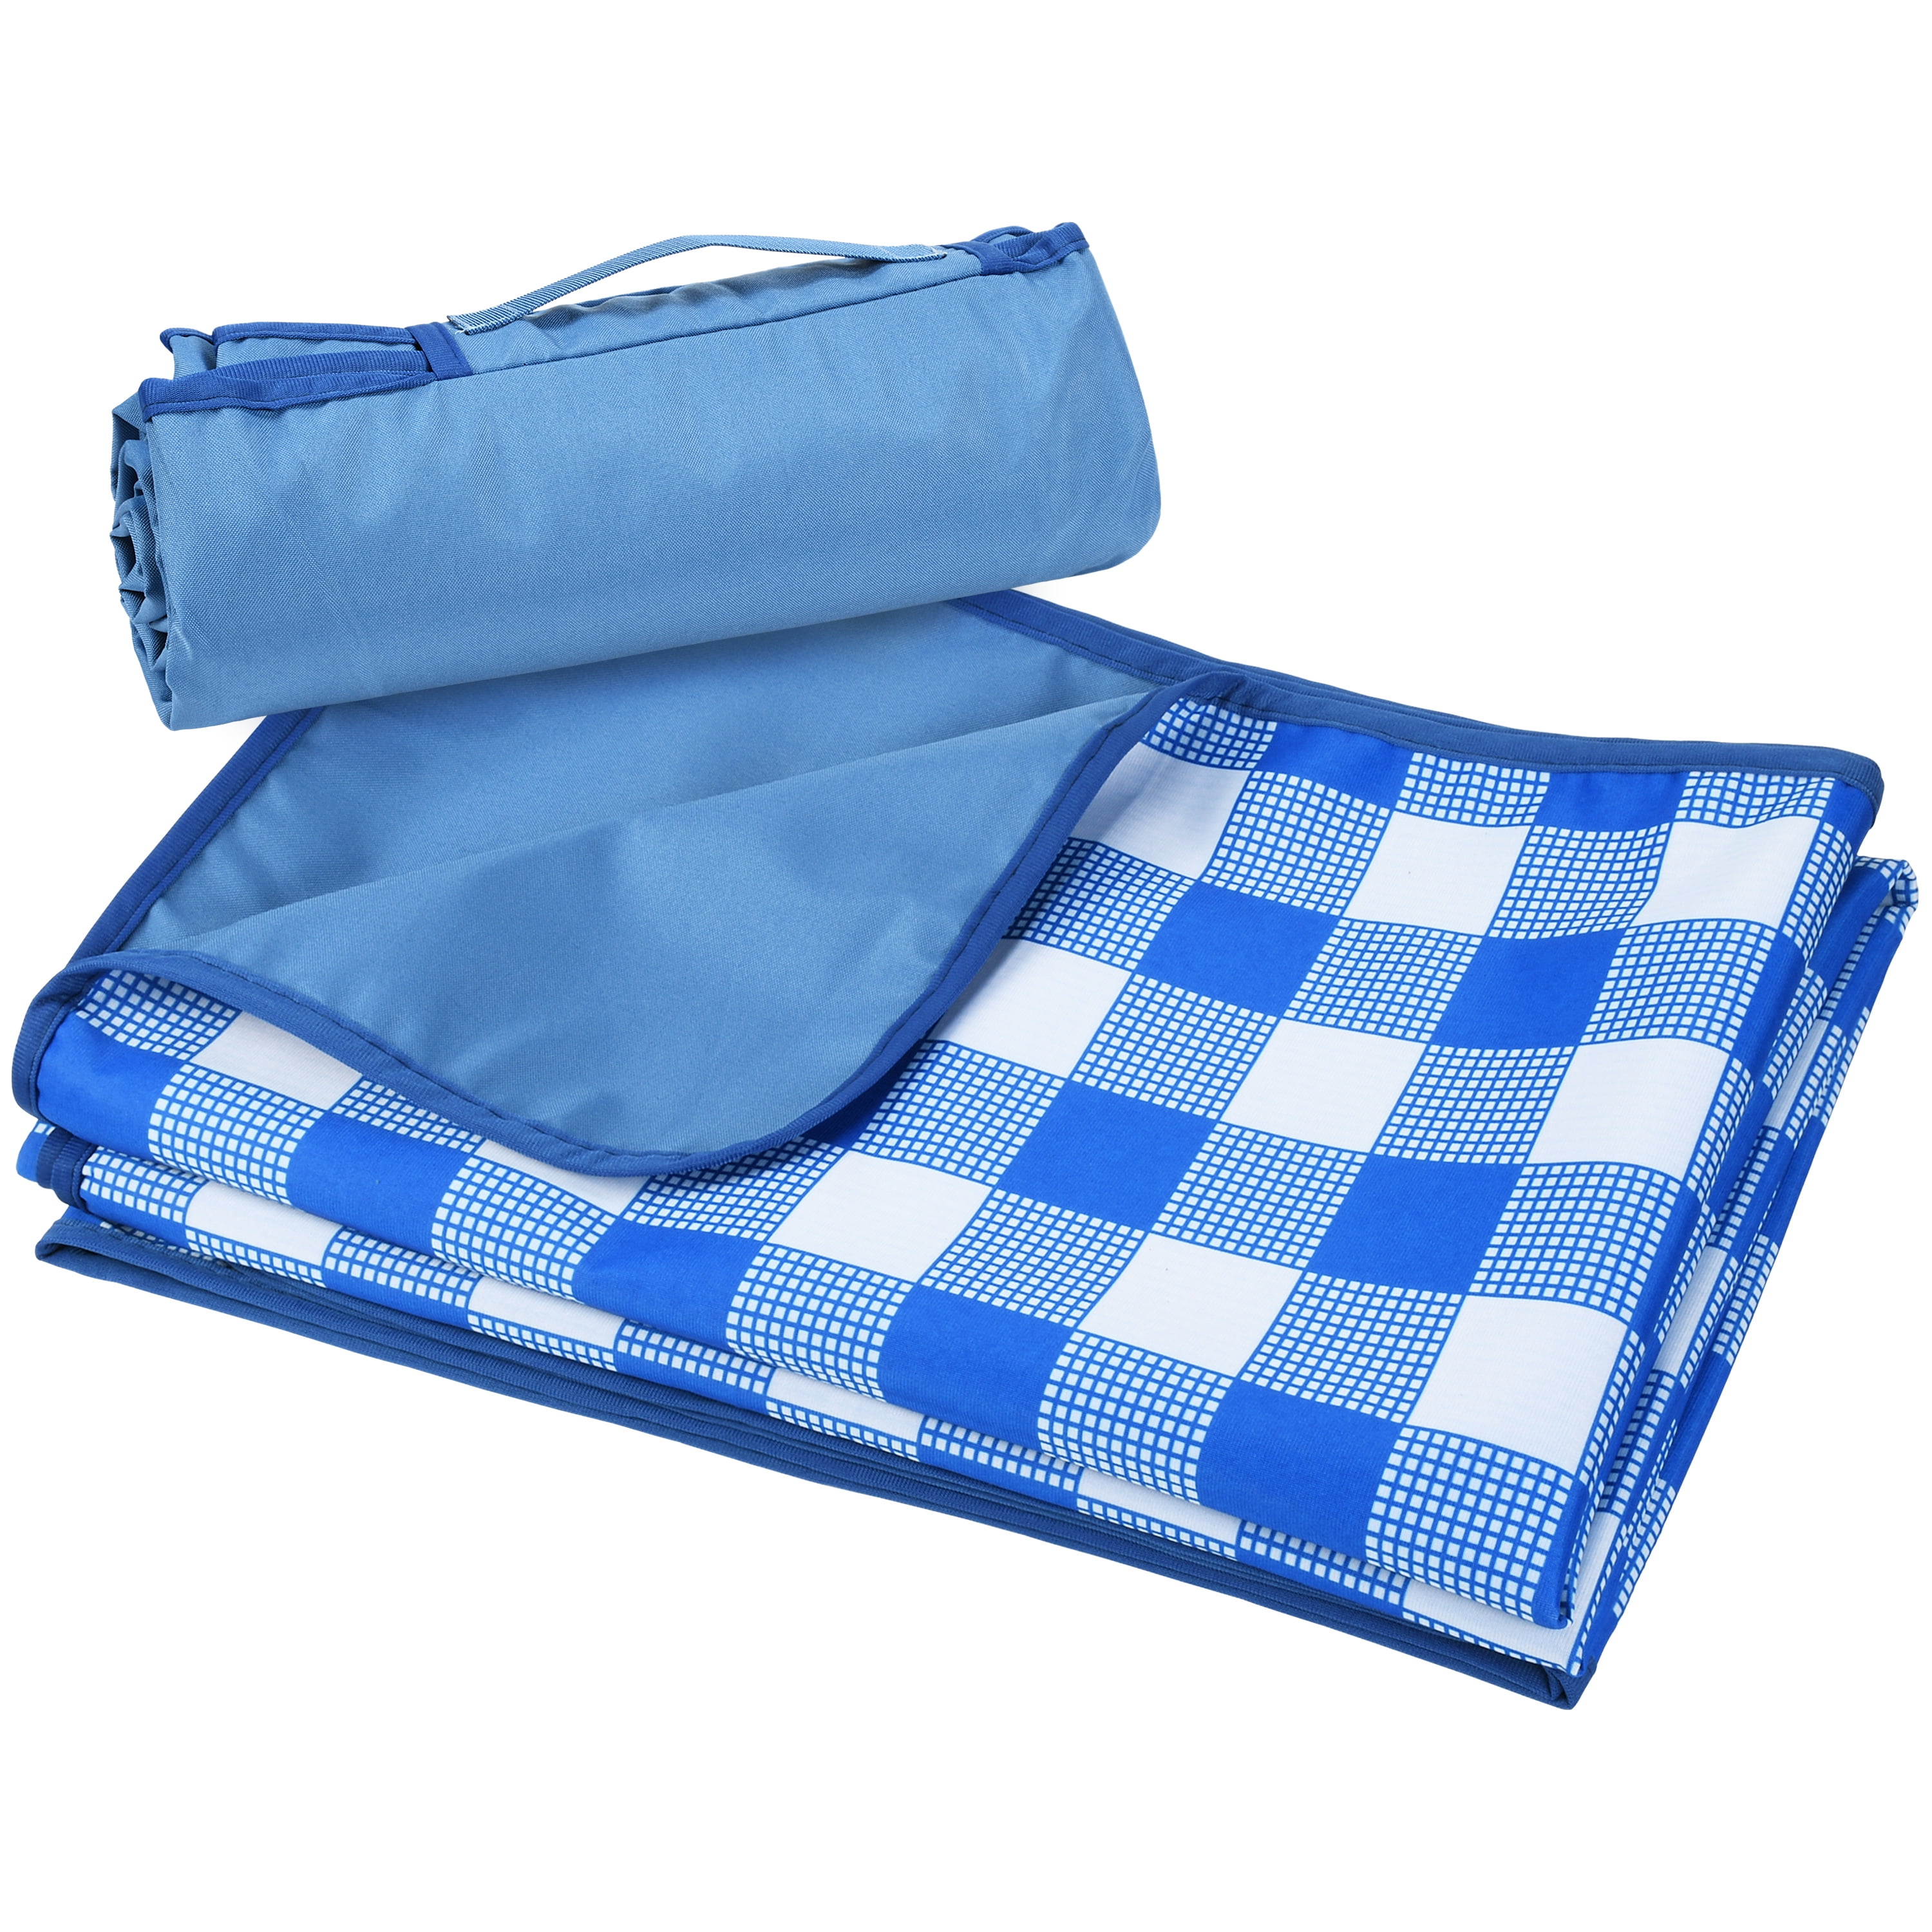 Waterproof Picnic Blanket, Washable Outdoor Blanket with Sherpa Lining,  Large Camping Blanket 150 x 200cm/ 59 x 79 Inches Windproof, Thick, Padded